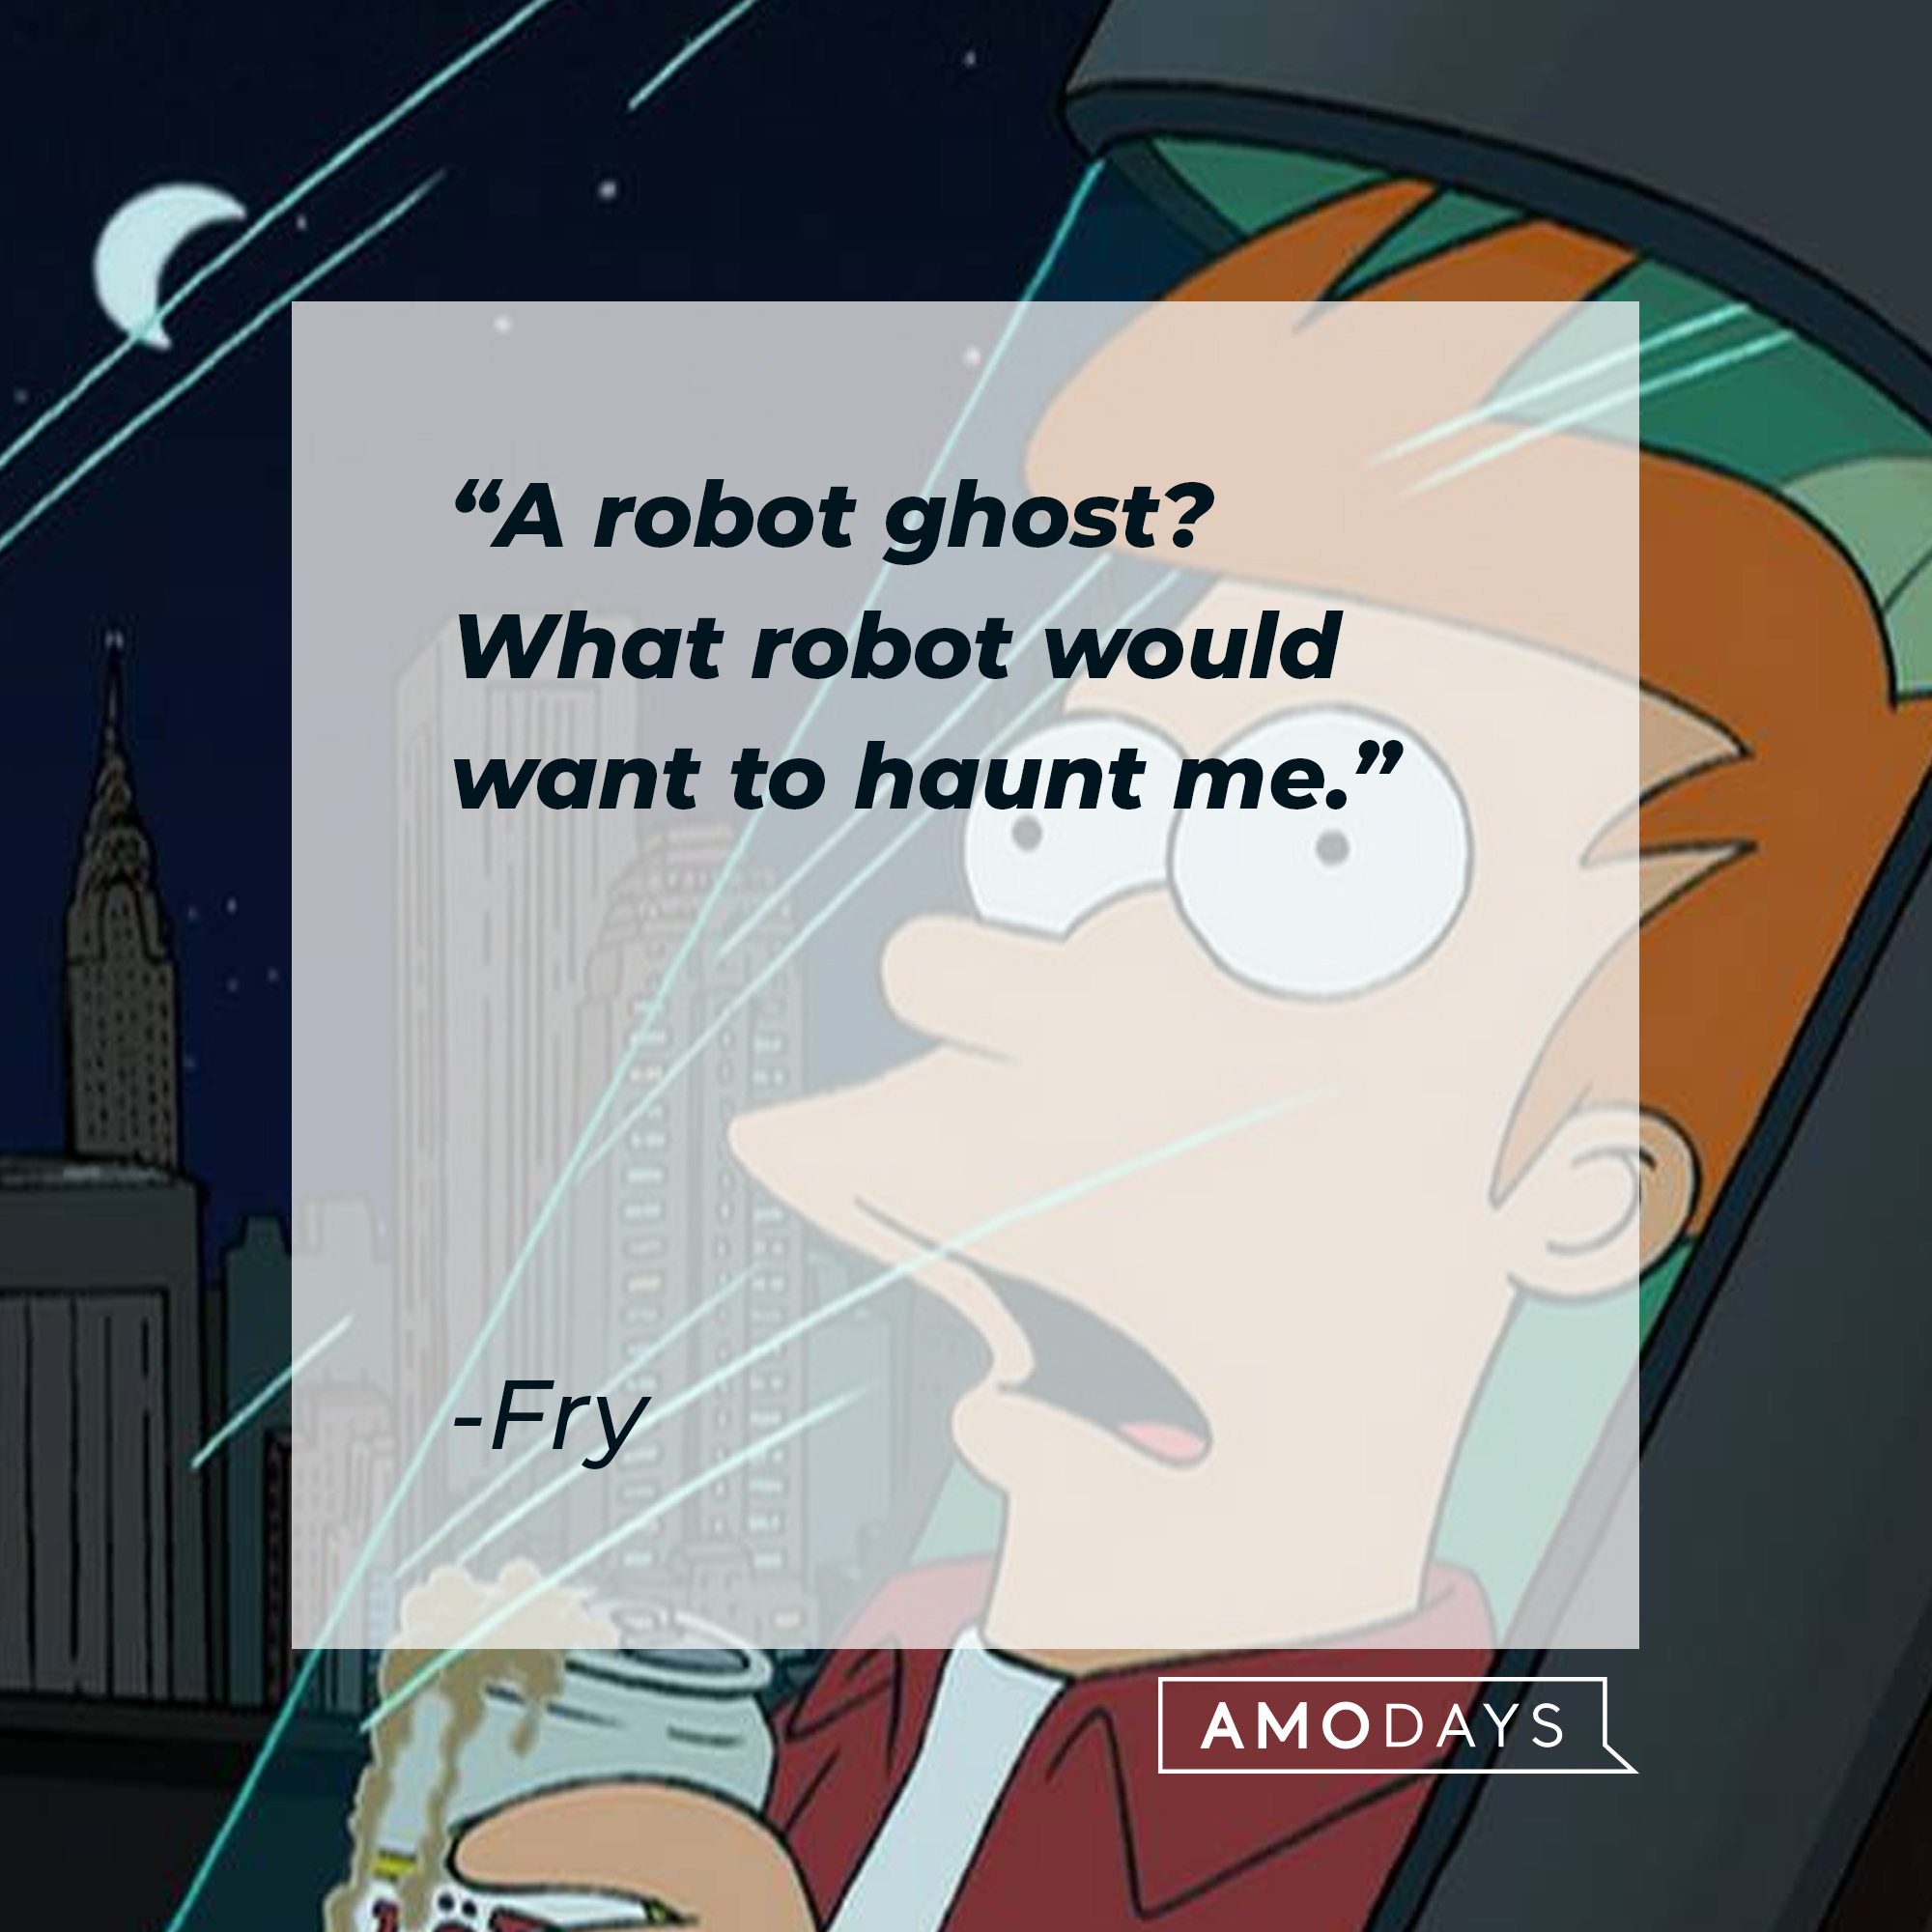 Fry Futurama's quote: "A robot ghost? What robot would want to haunt me." | Source: Facebook.com/Futurama